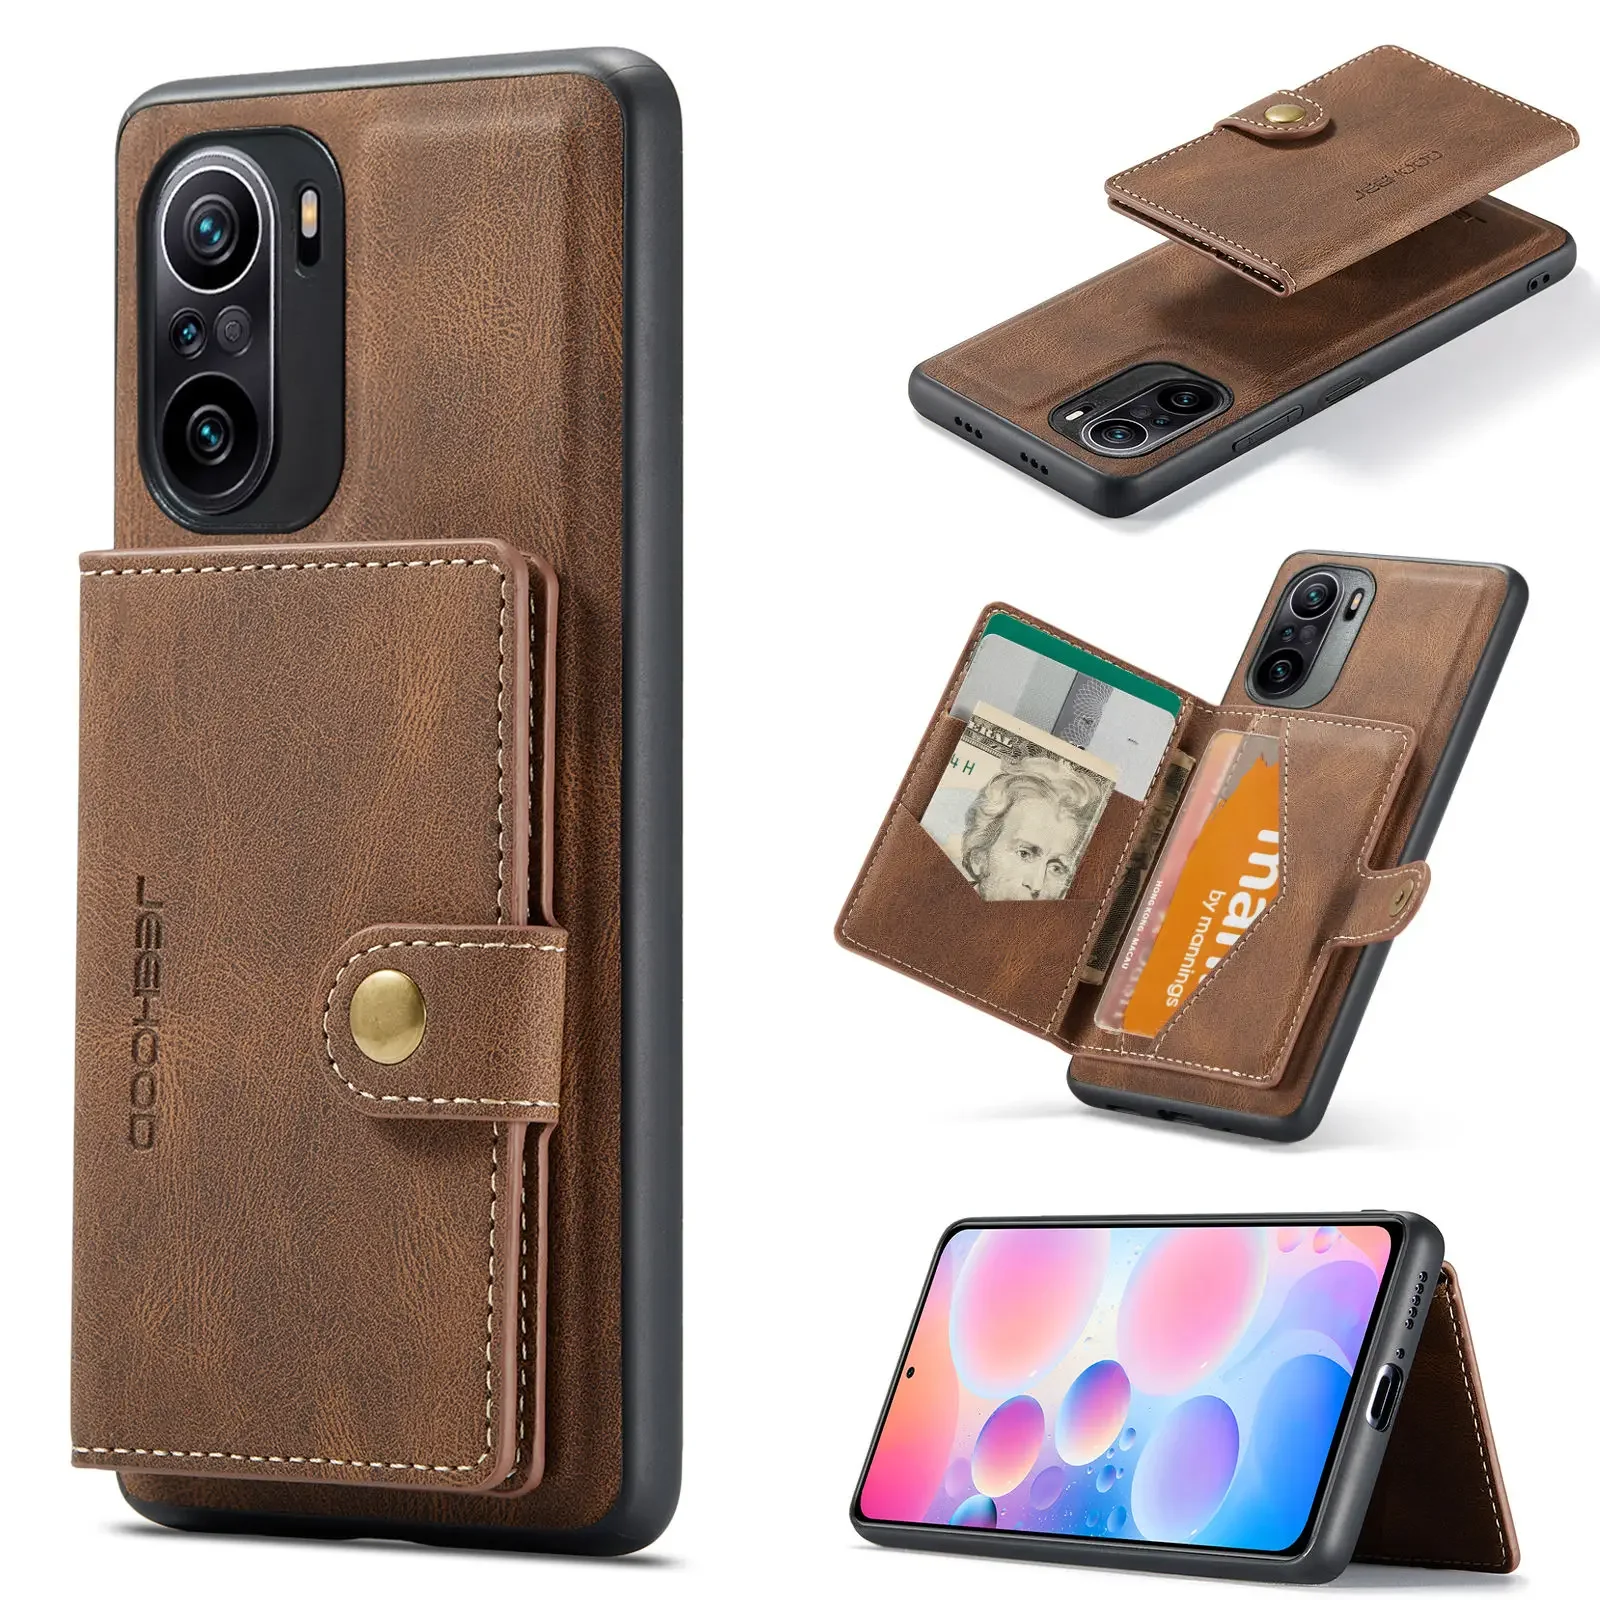 

for XiaoMi Poco F3 RedMi K40 Pro Leather Case with Magnetic Wallet Leather Small Wallet in Kickstand Card Holder Designed Cover